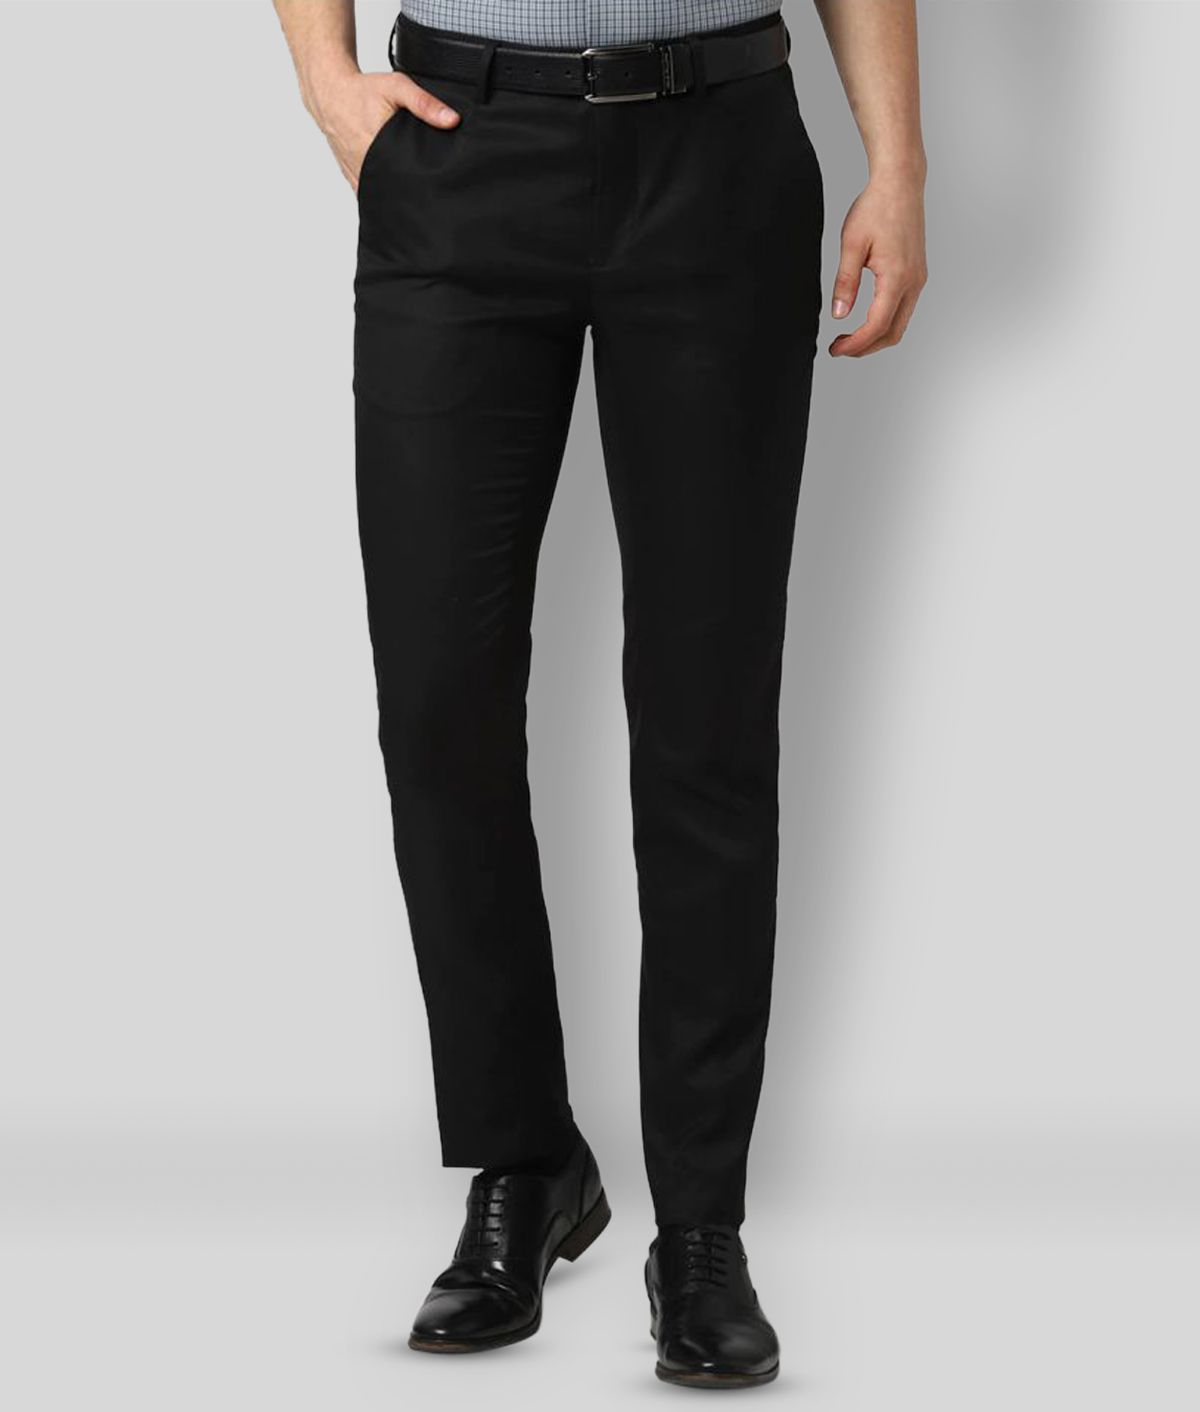     			Haul Chic - Black Poly Blend Slim - Fit Men's Trousers ( Pack of 1 )